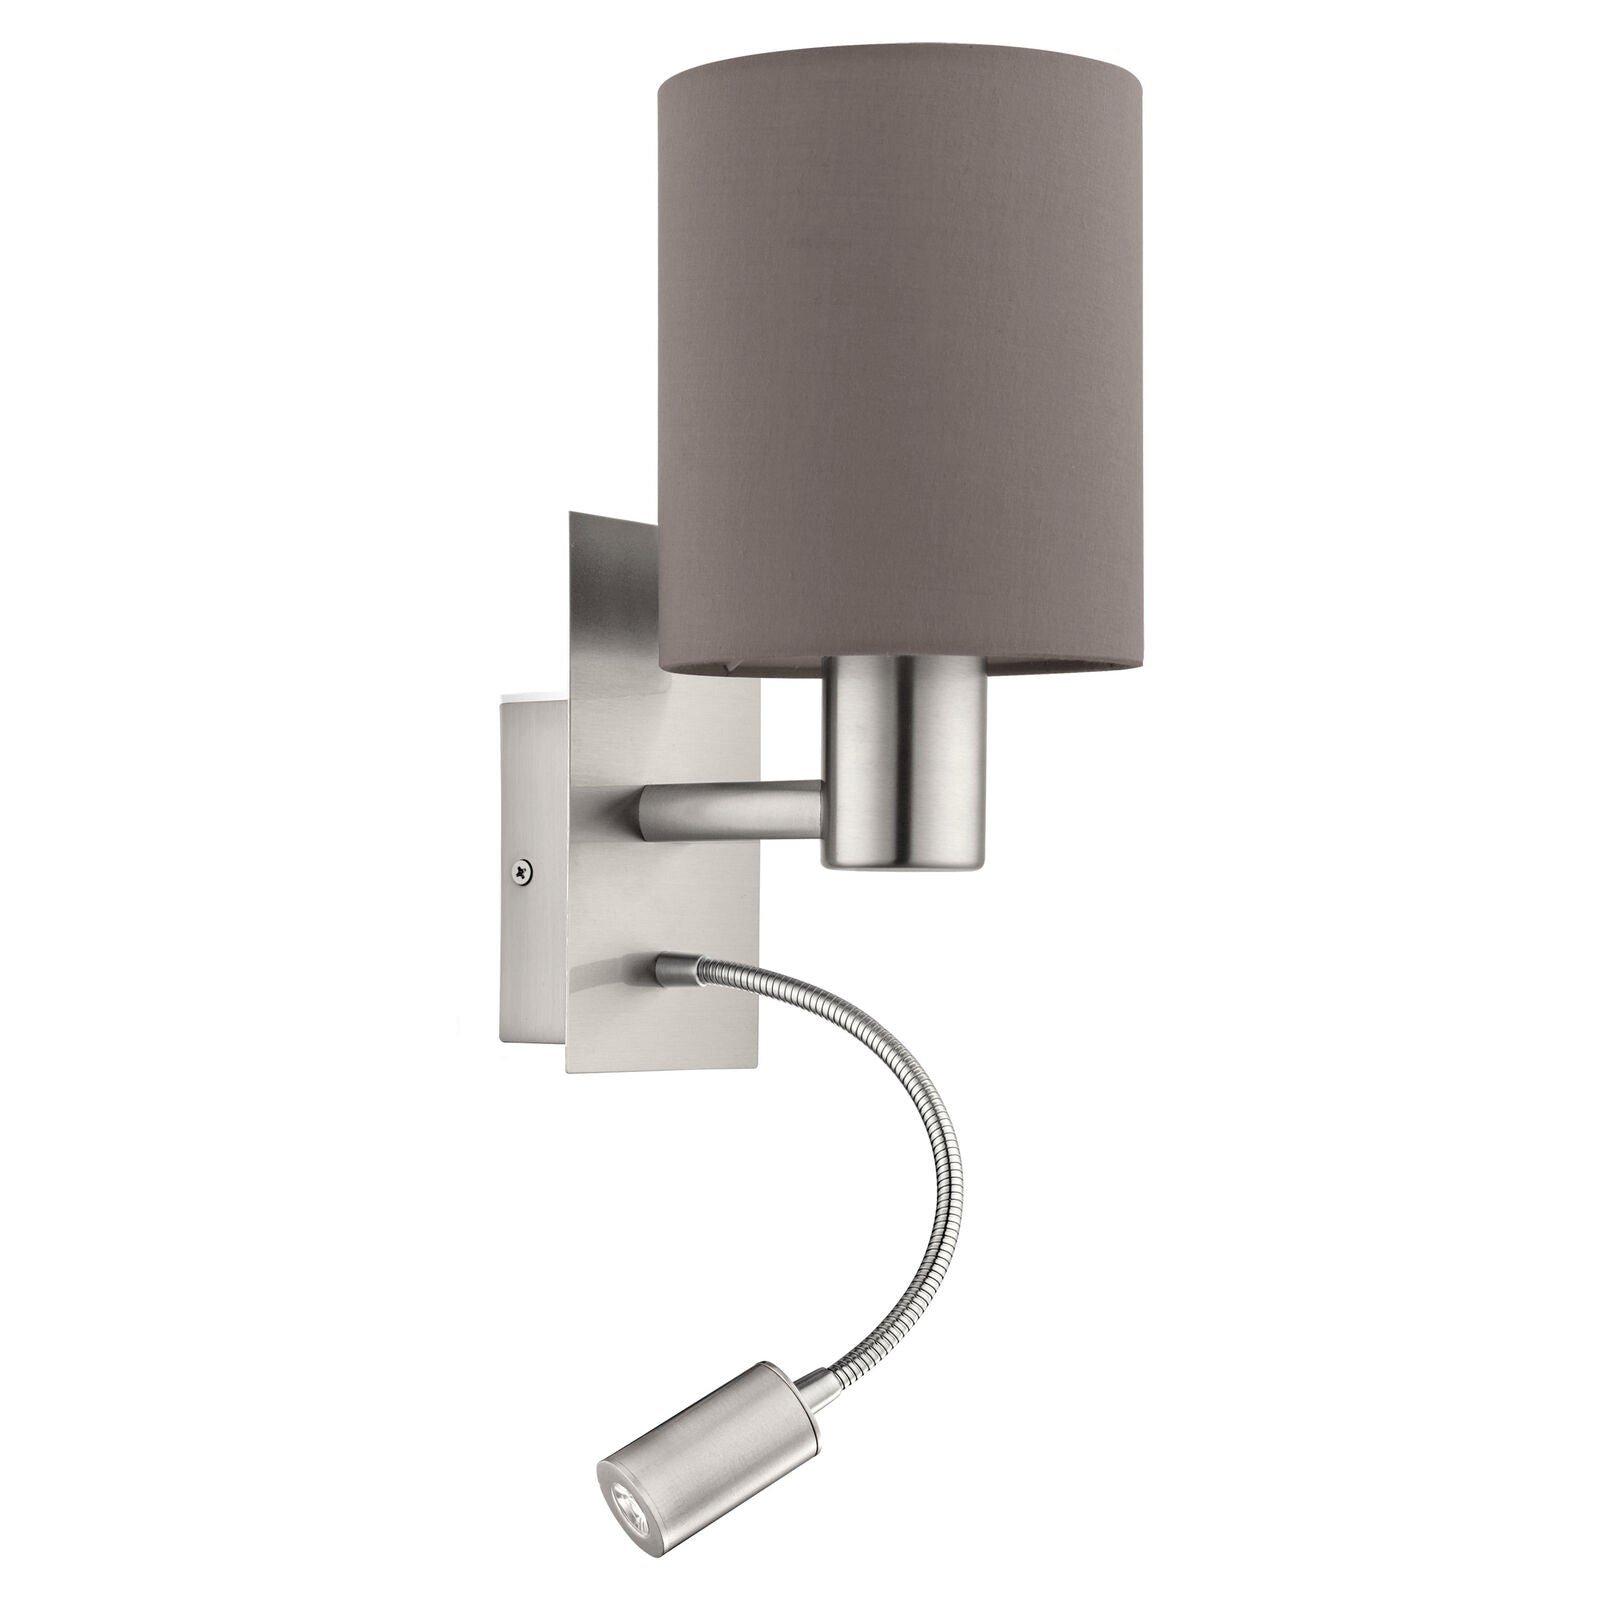 Wall Light Satin Nickel Shade Anthracite Brown Fabric Bulb E27 LED 1x40W 1x3.5W